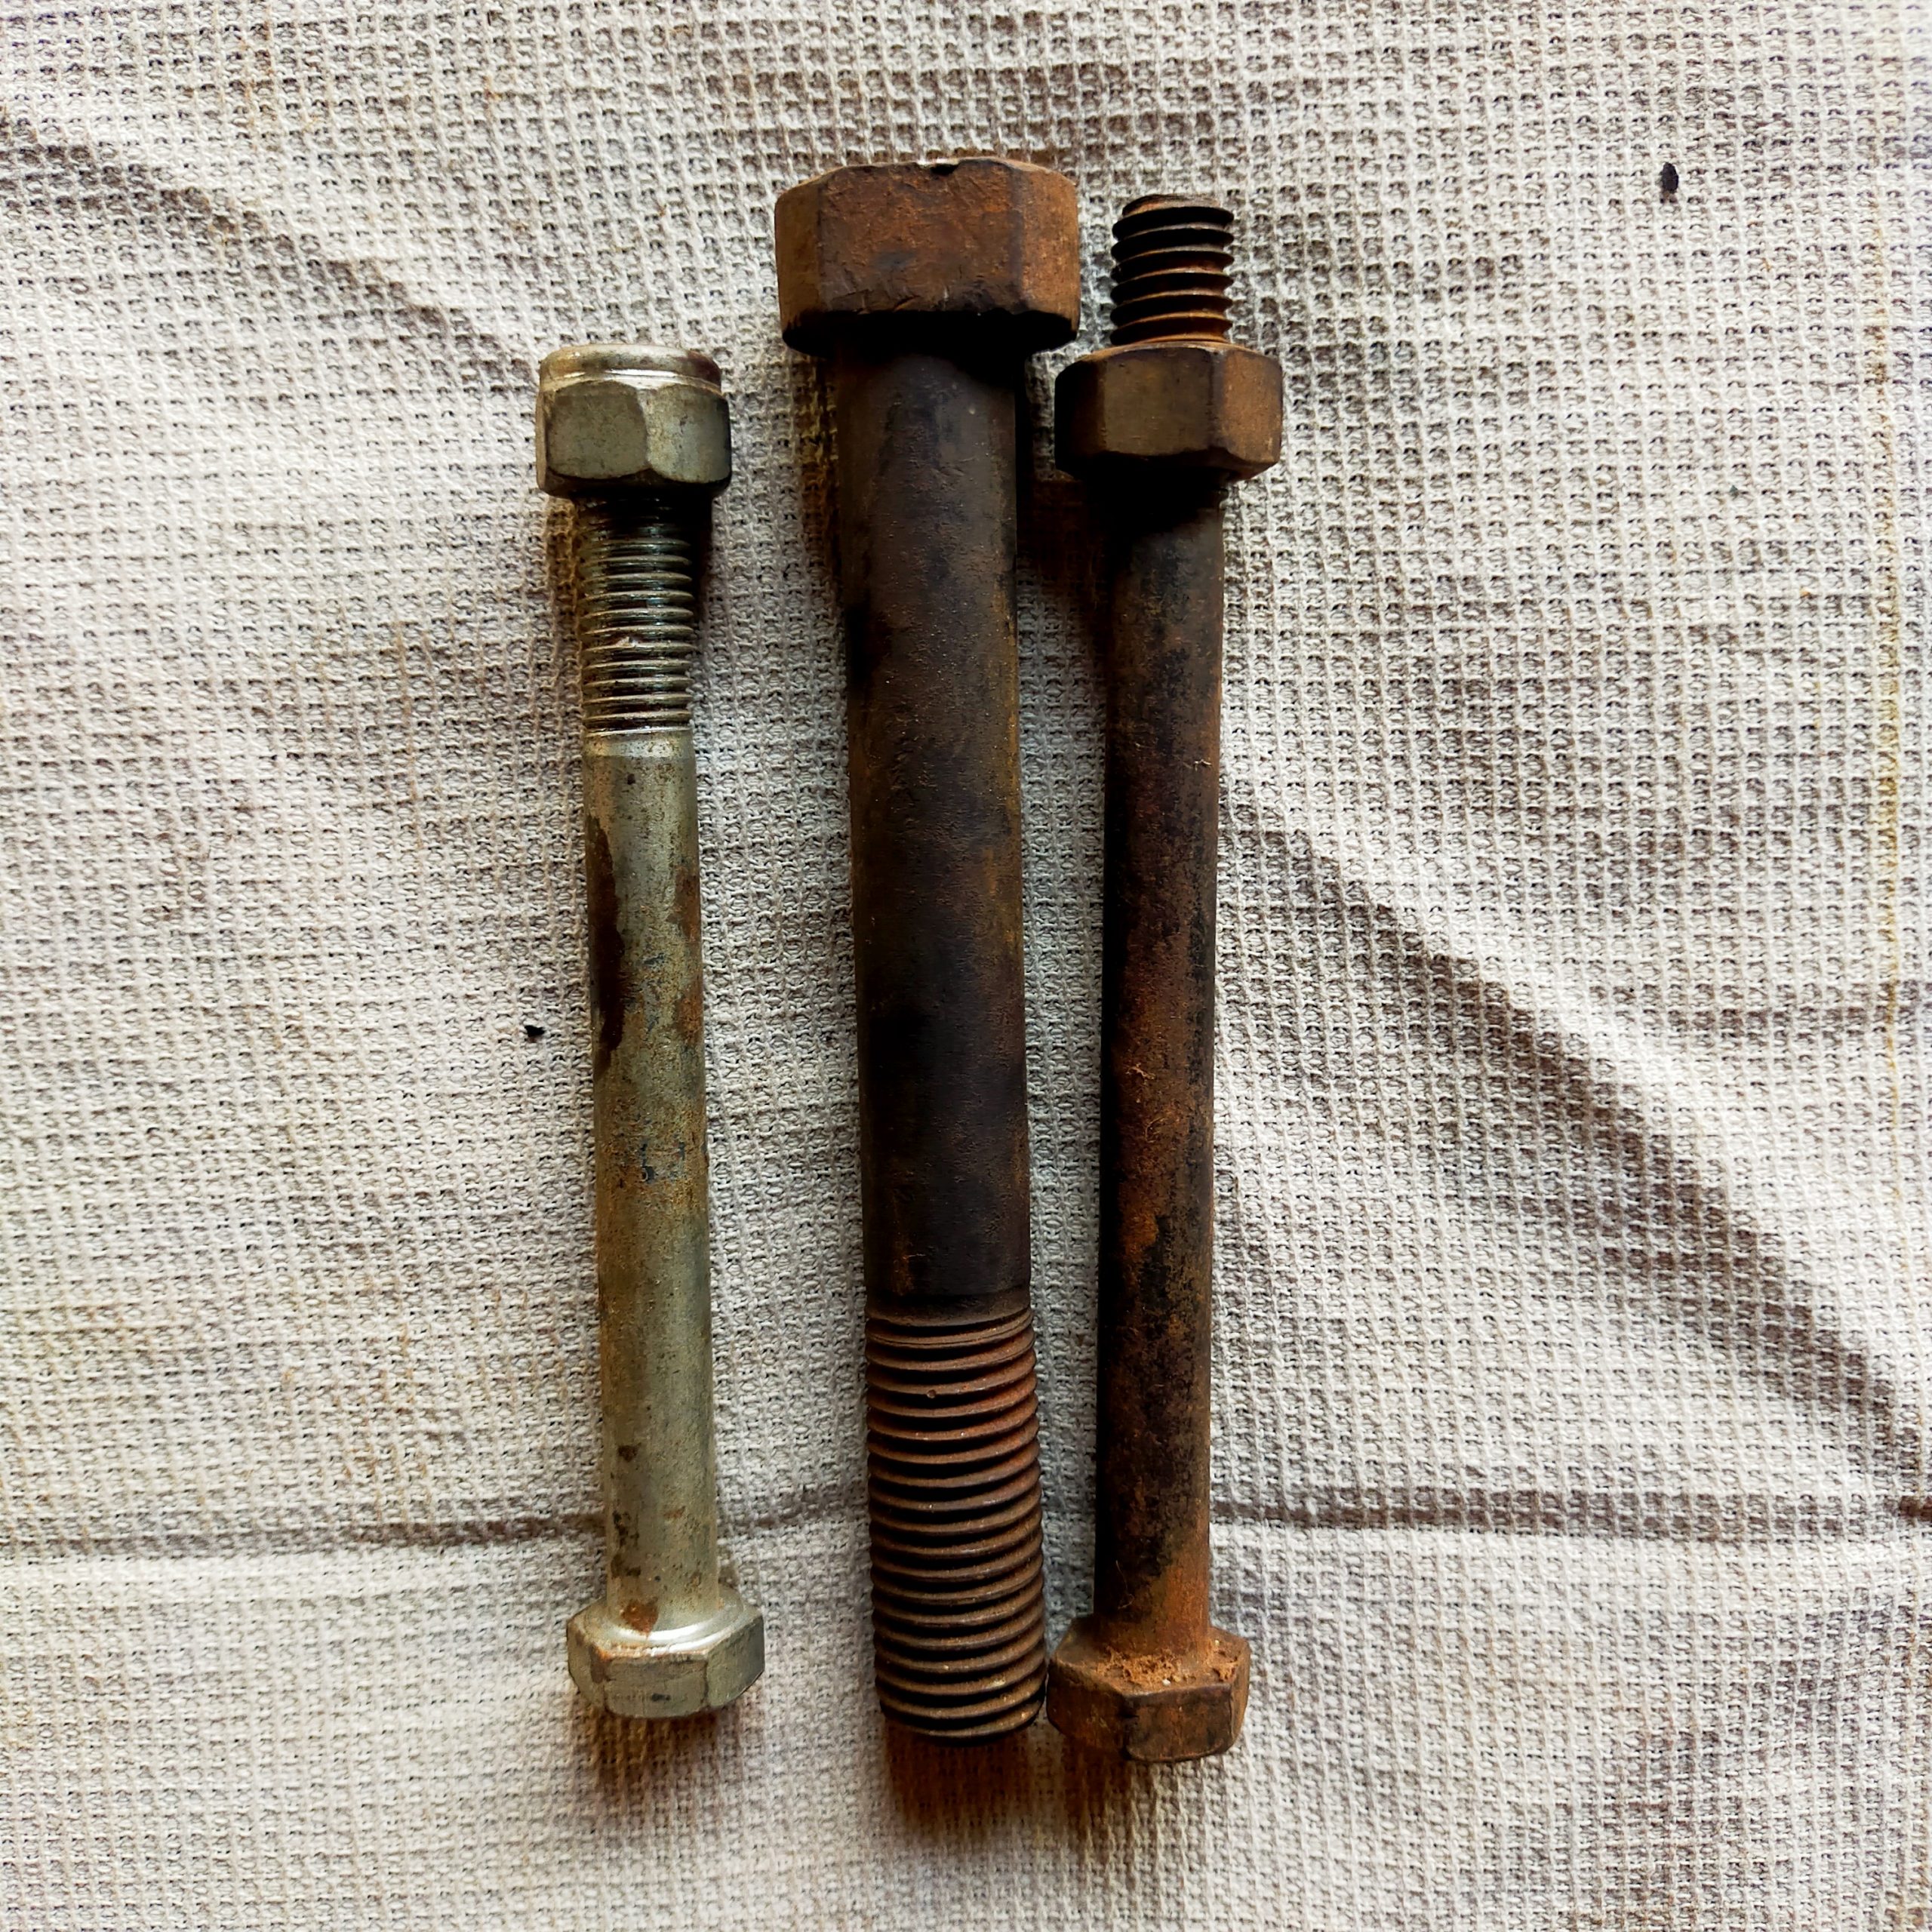 Rusted bolts